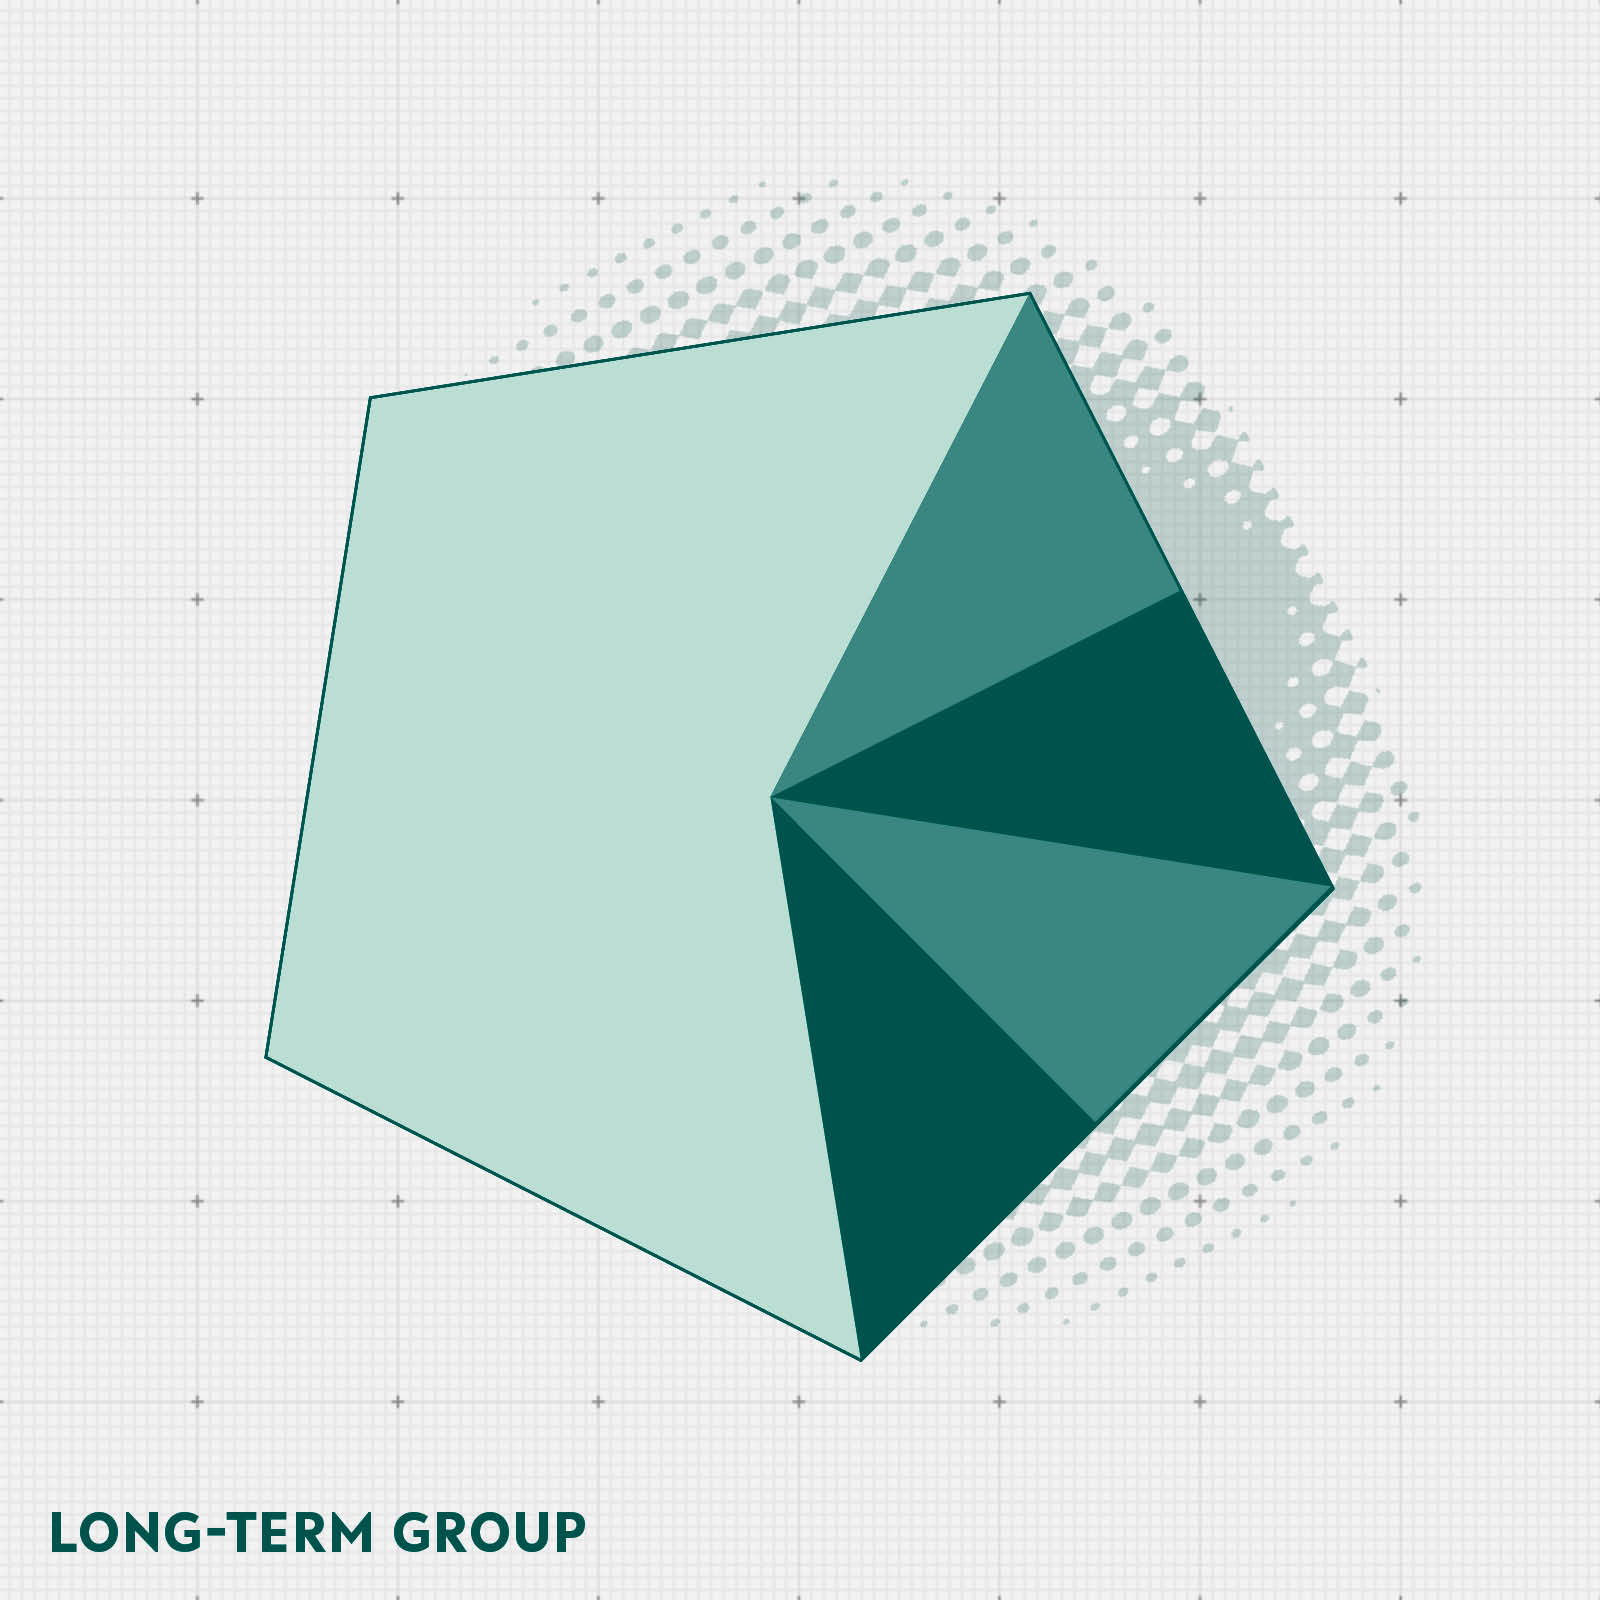 Graphic: a mint pentagon with lighter and darker green triangles on it, representing the different stays of a Long-Term Group